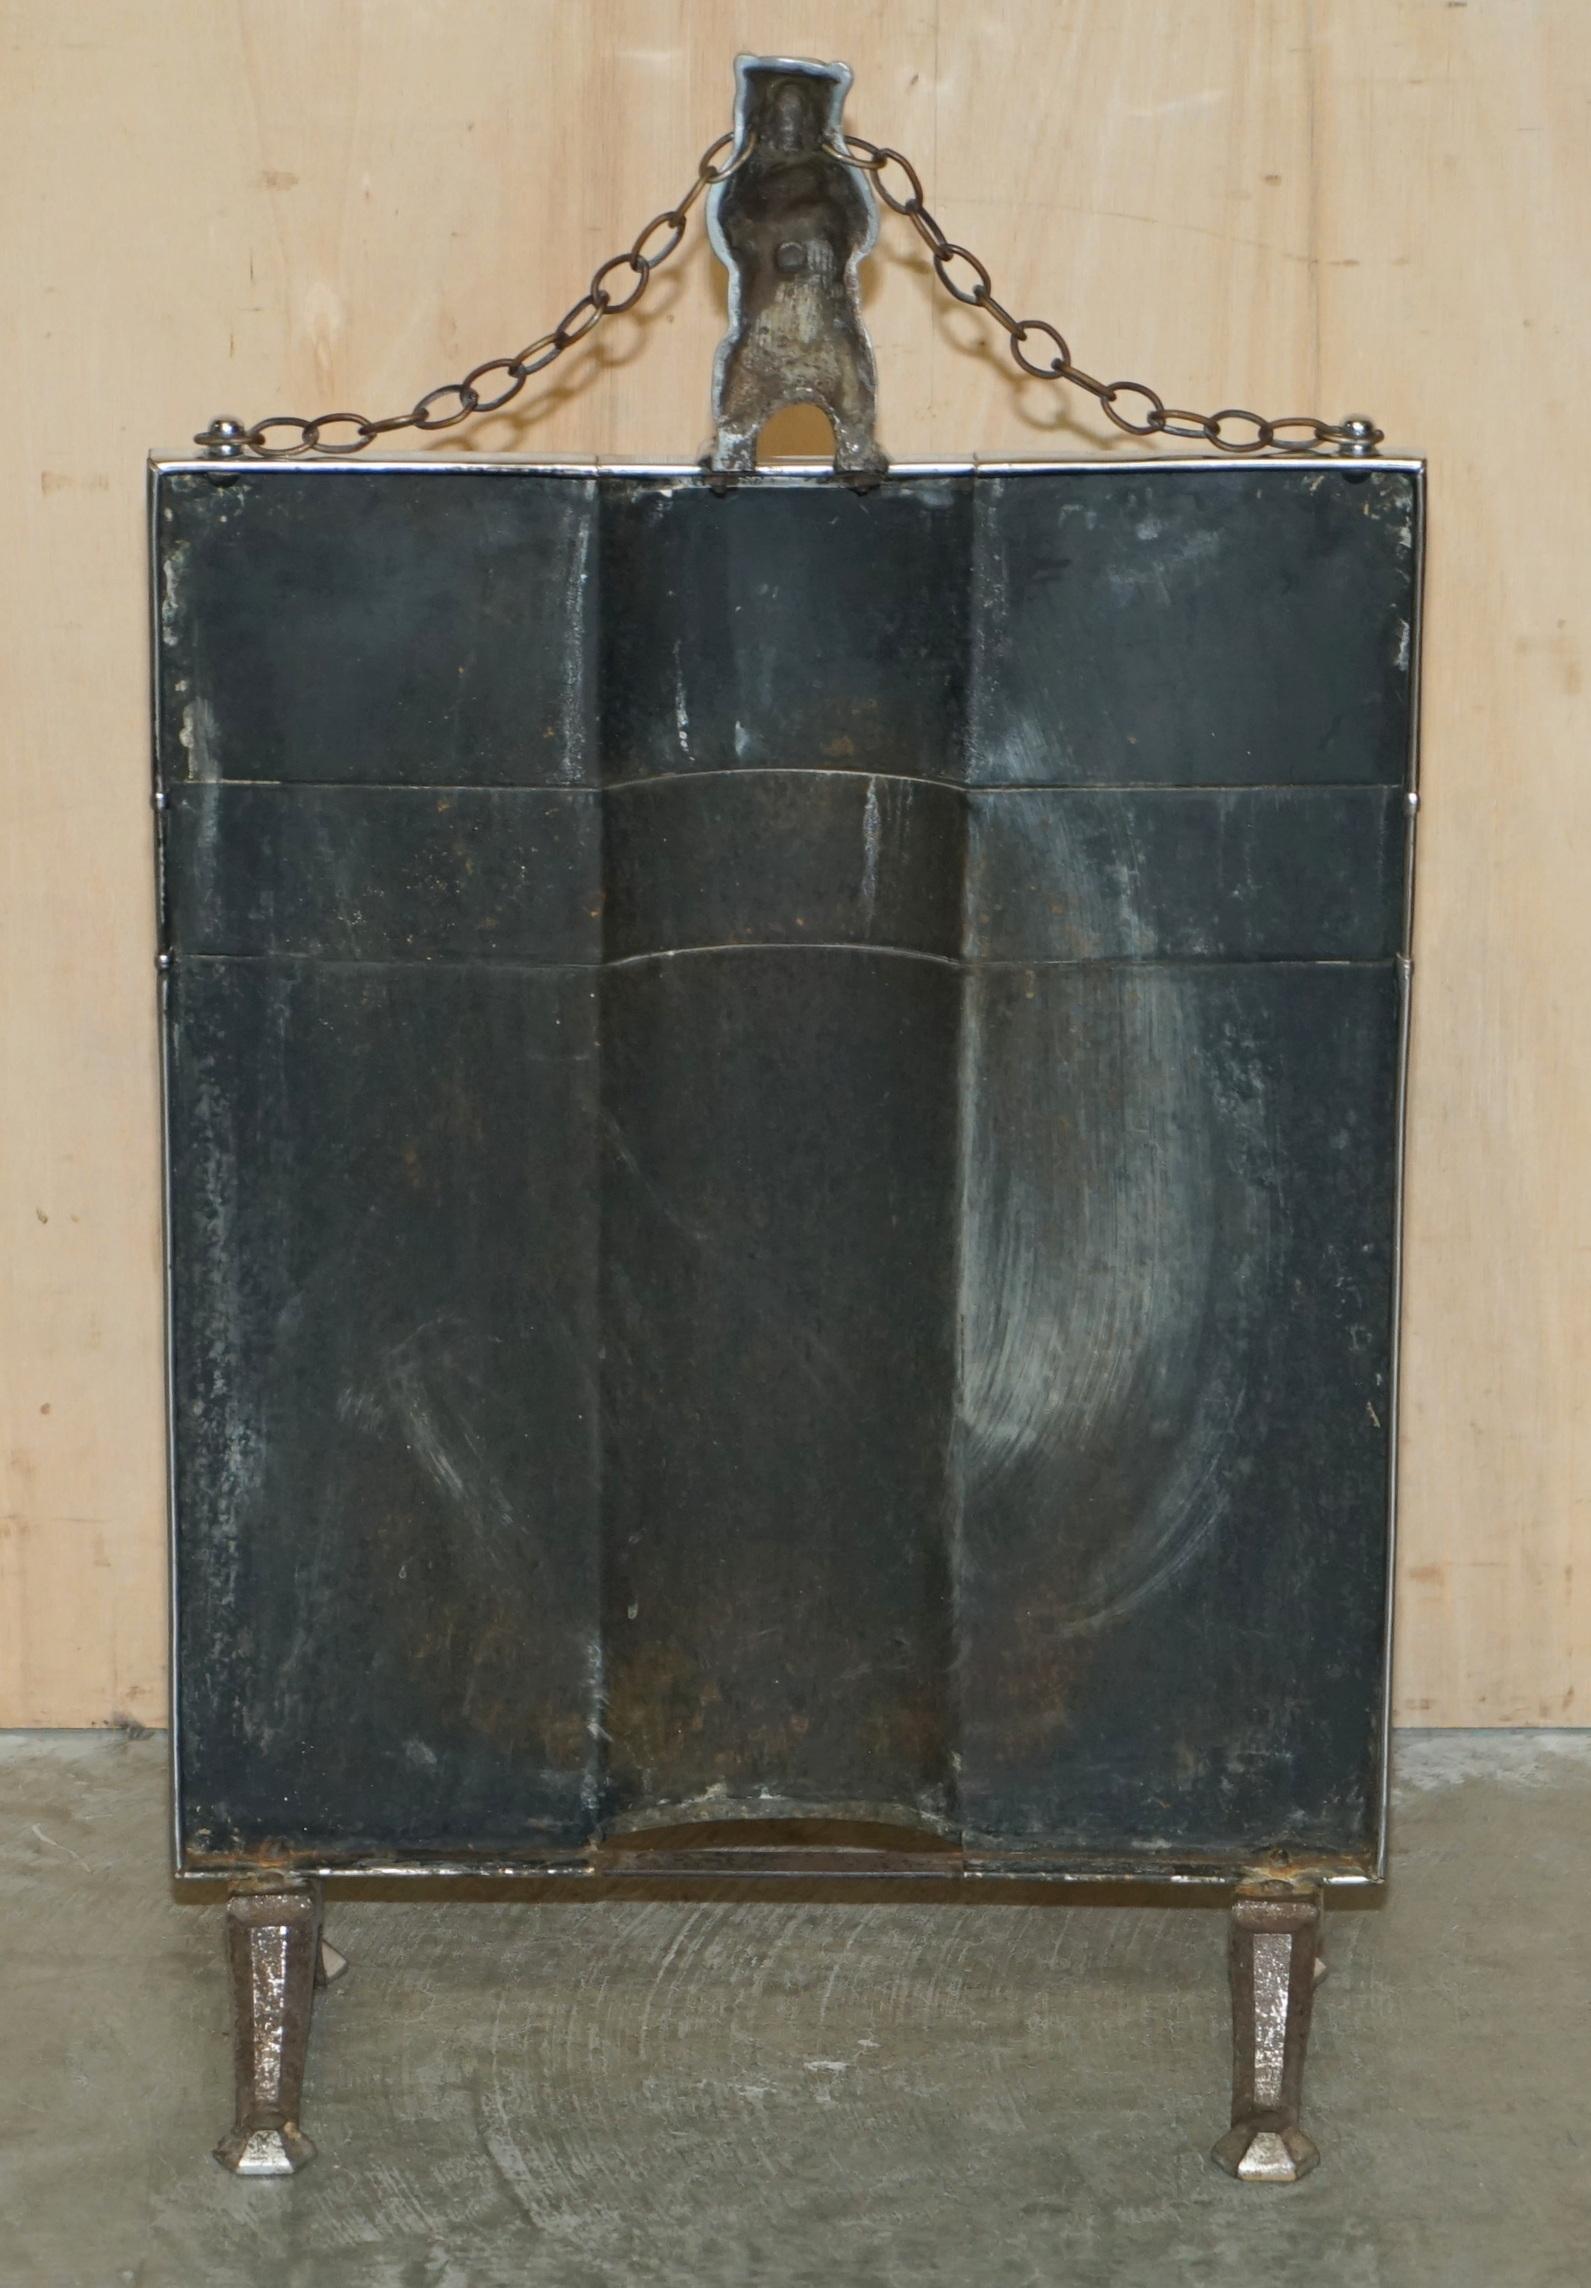 ART DECO ANTiQUE CIRCA 1920'S POLISHED CHROME FIRE GUARD SCREEN WITH BEAR ON TOP For Sale 9